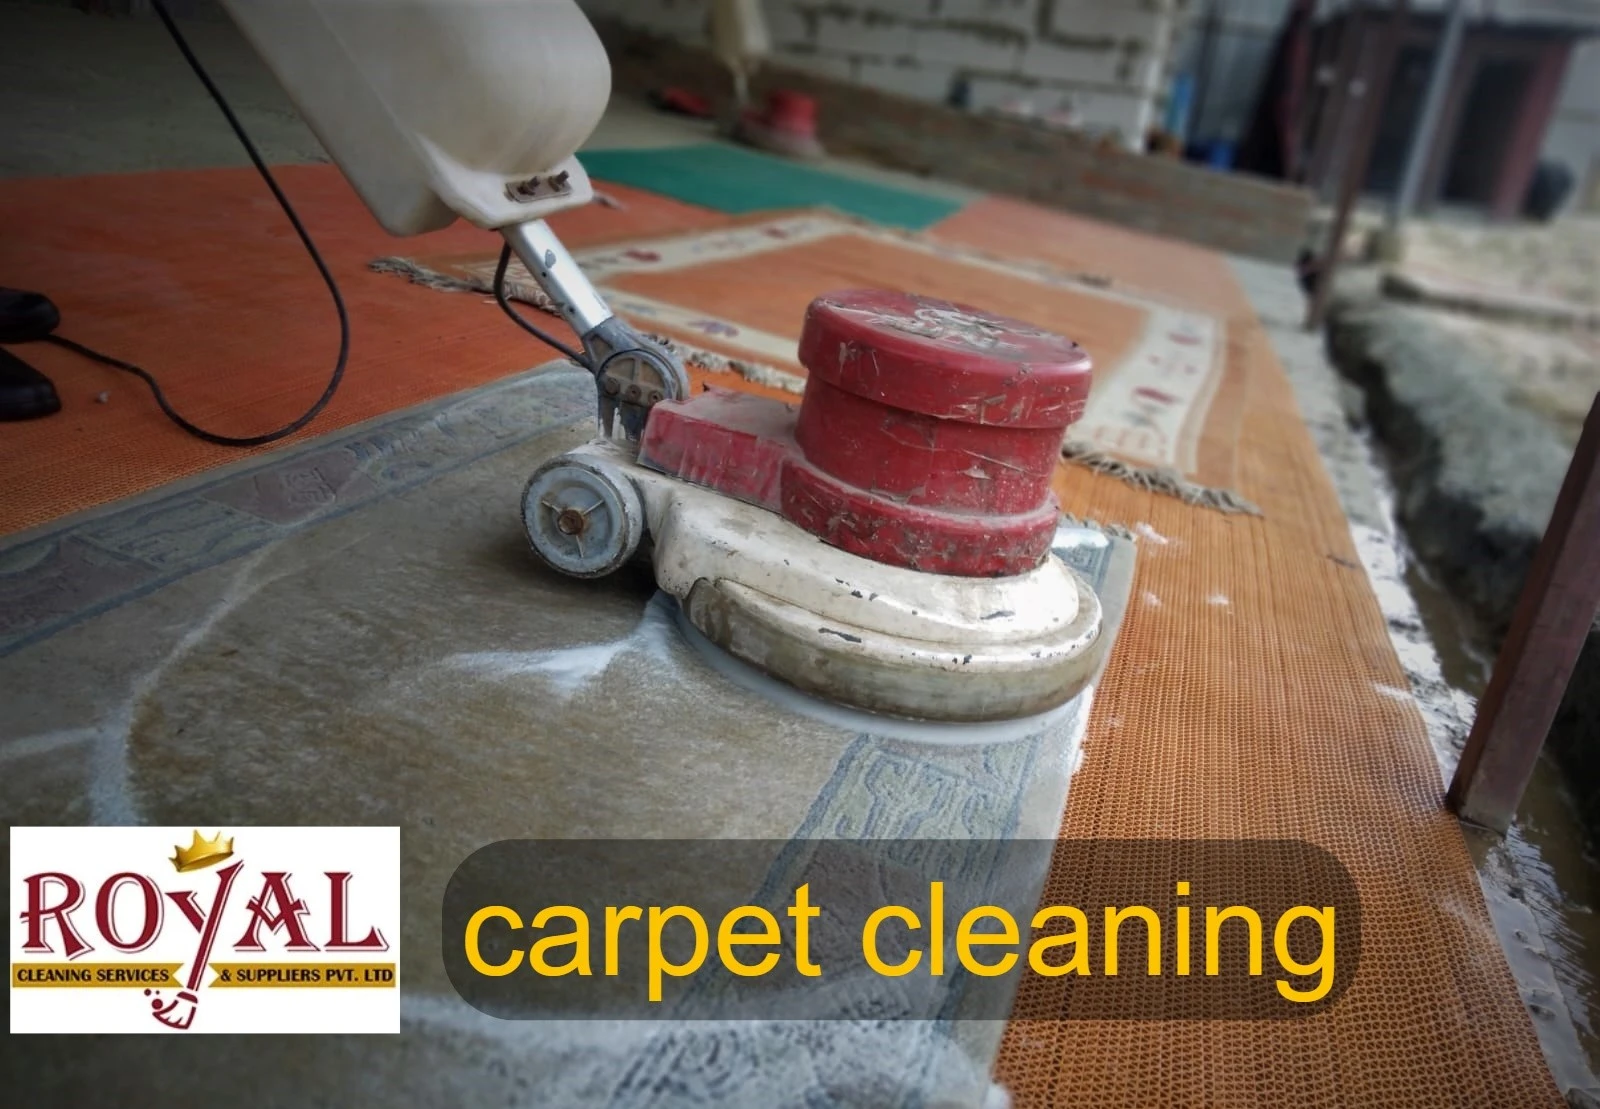 CARPET CLEANING SERVICE